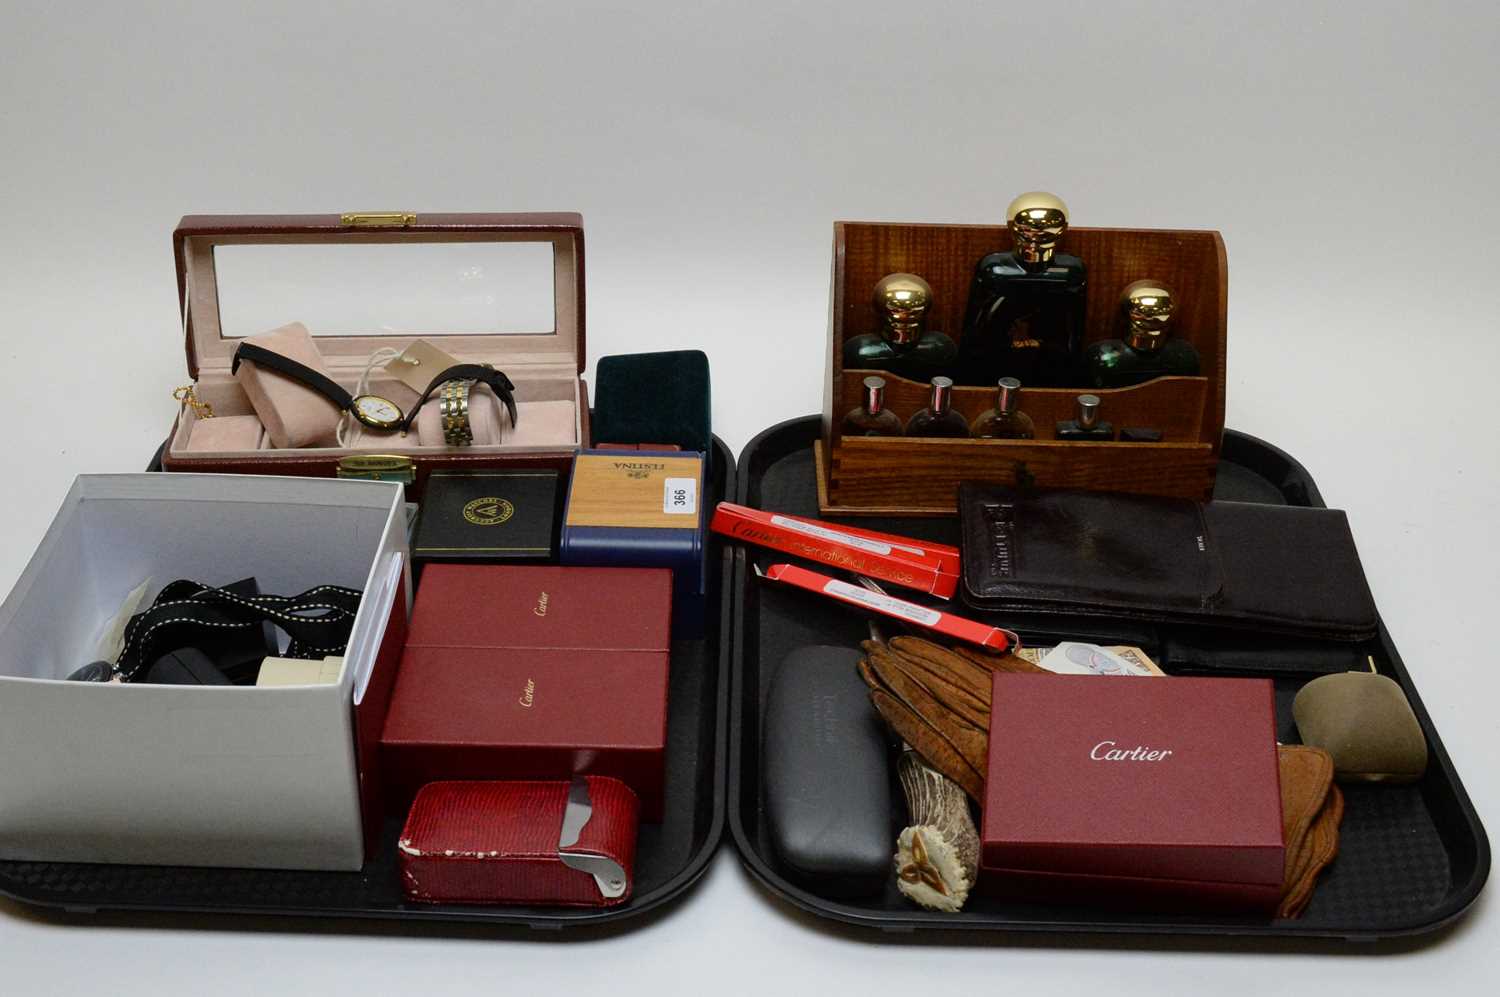 Lot 366 - Cartier jewellery/watch cleaning kits; and other miscellaneous items.